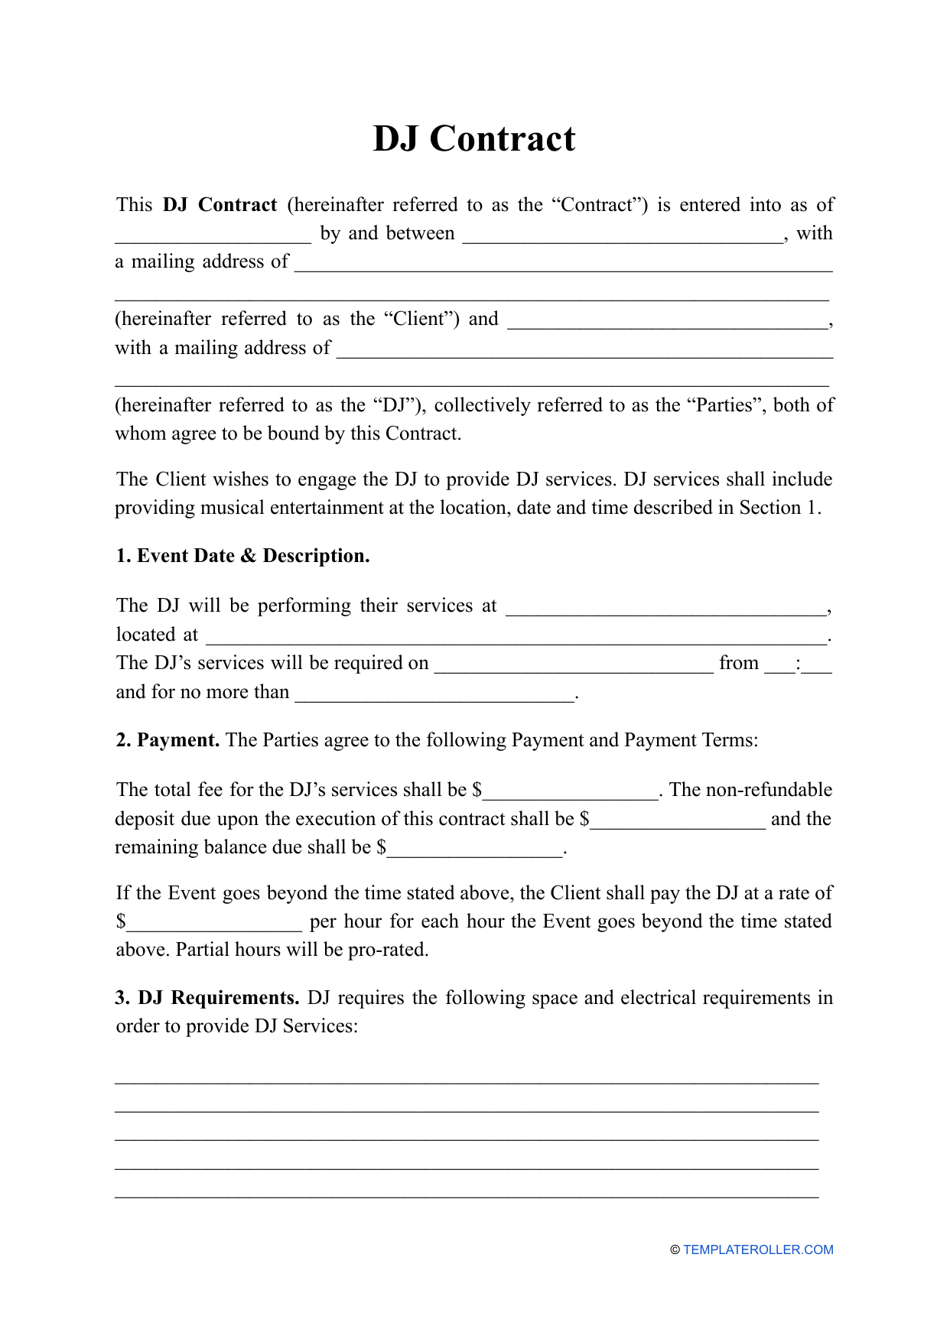 Disc Jockey (DJ) Services Contract Template, Page 1